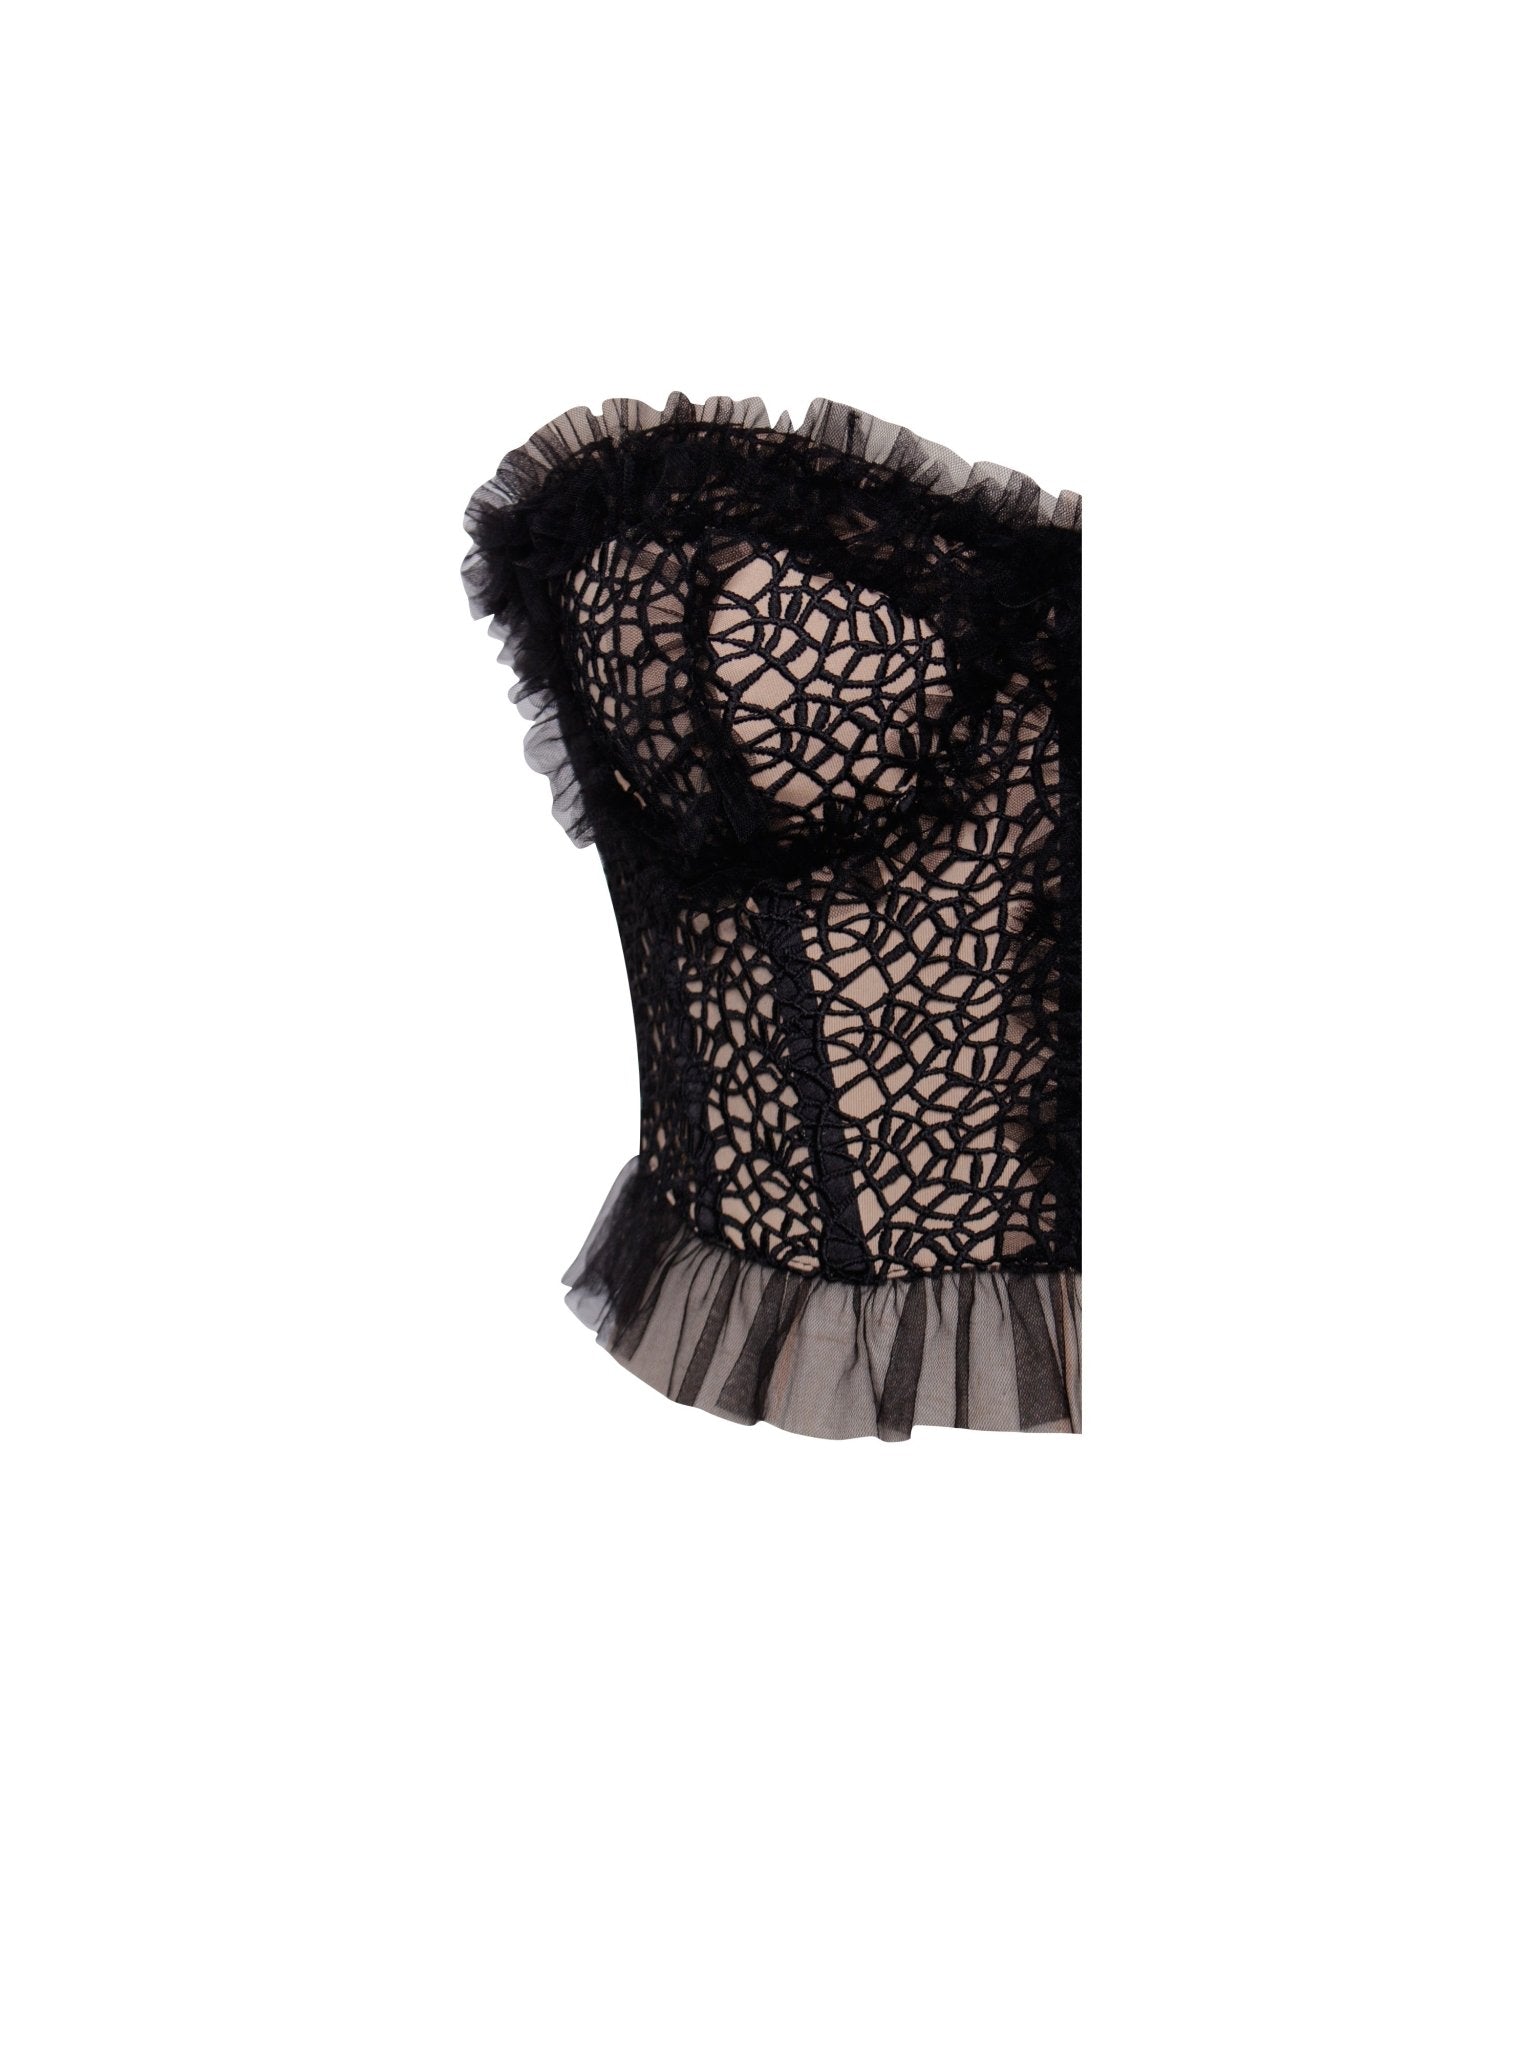 Orah Black Mesh and Lace Corset Top - HOUSE OF SHE